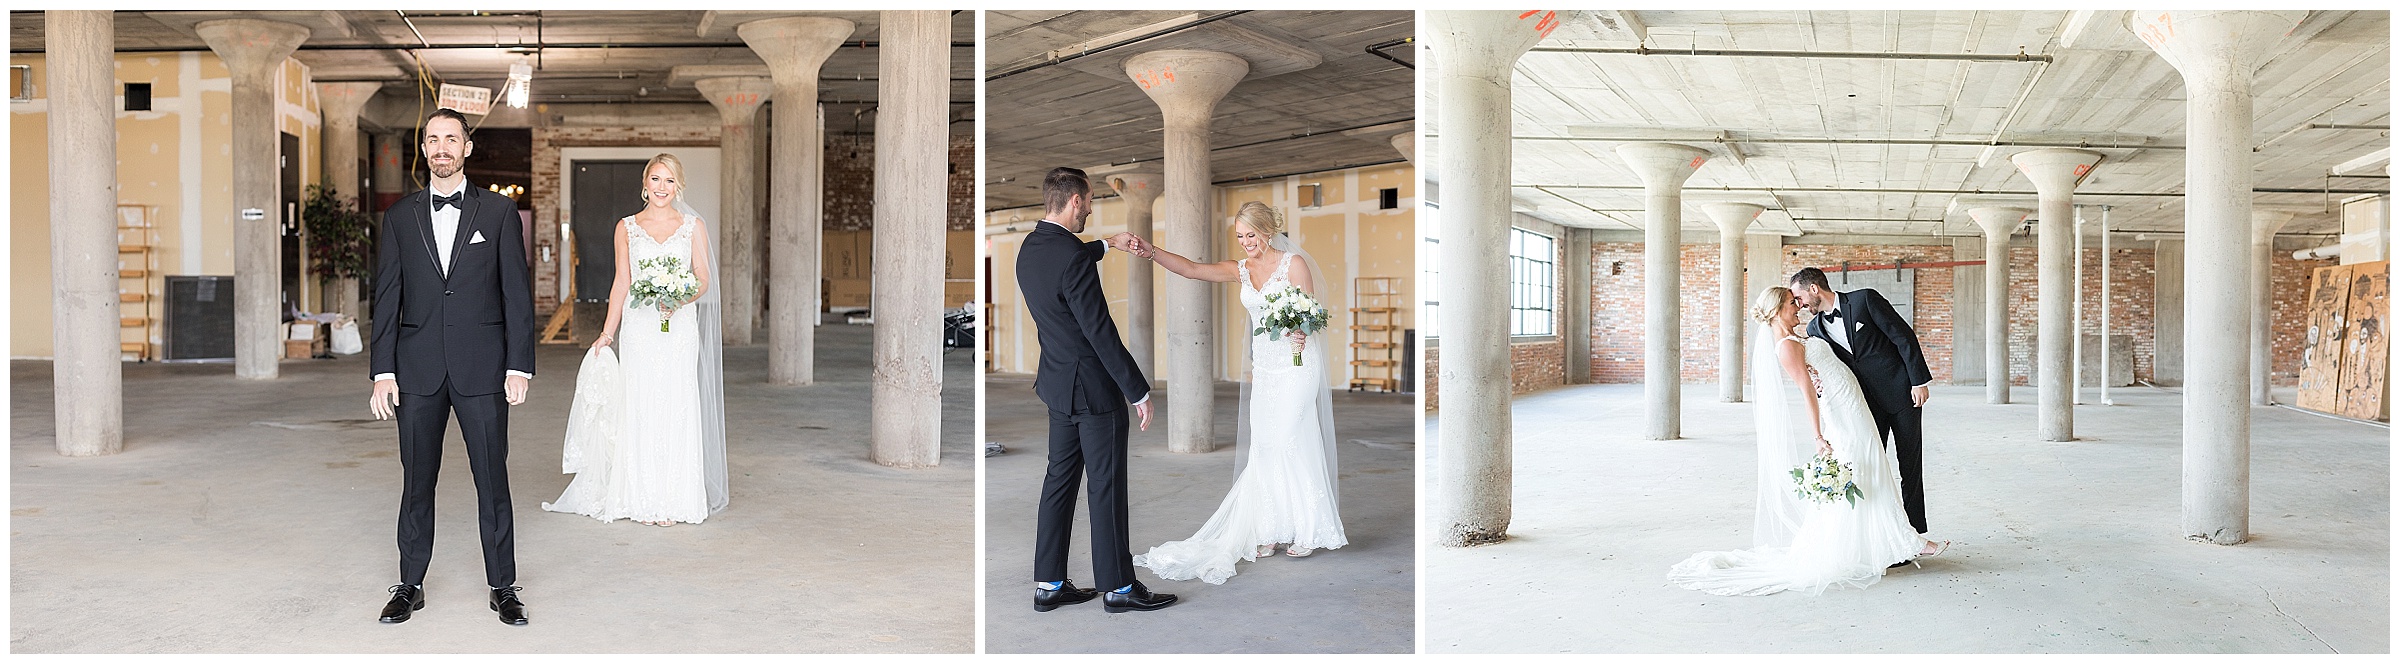 bride and groom first look in empty loft